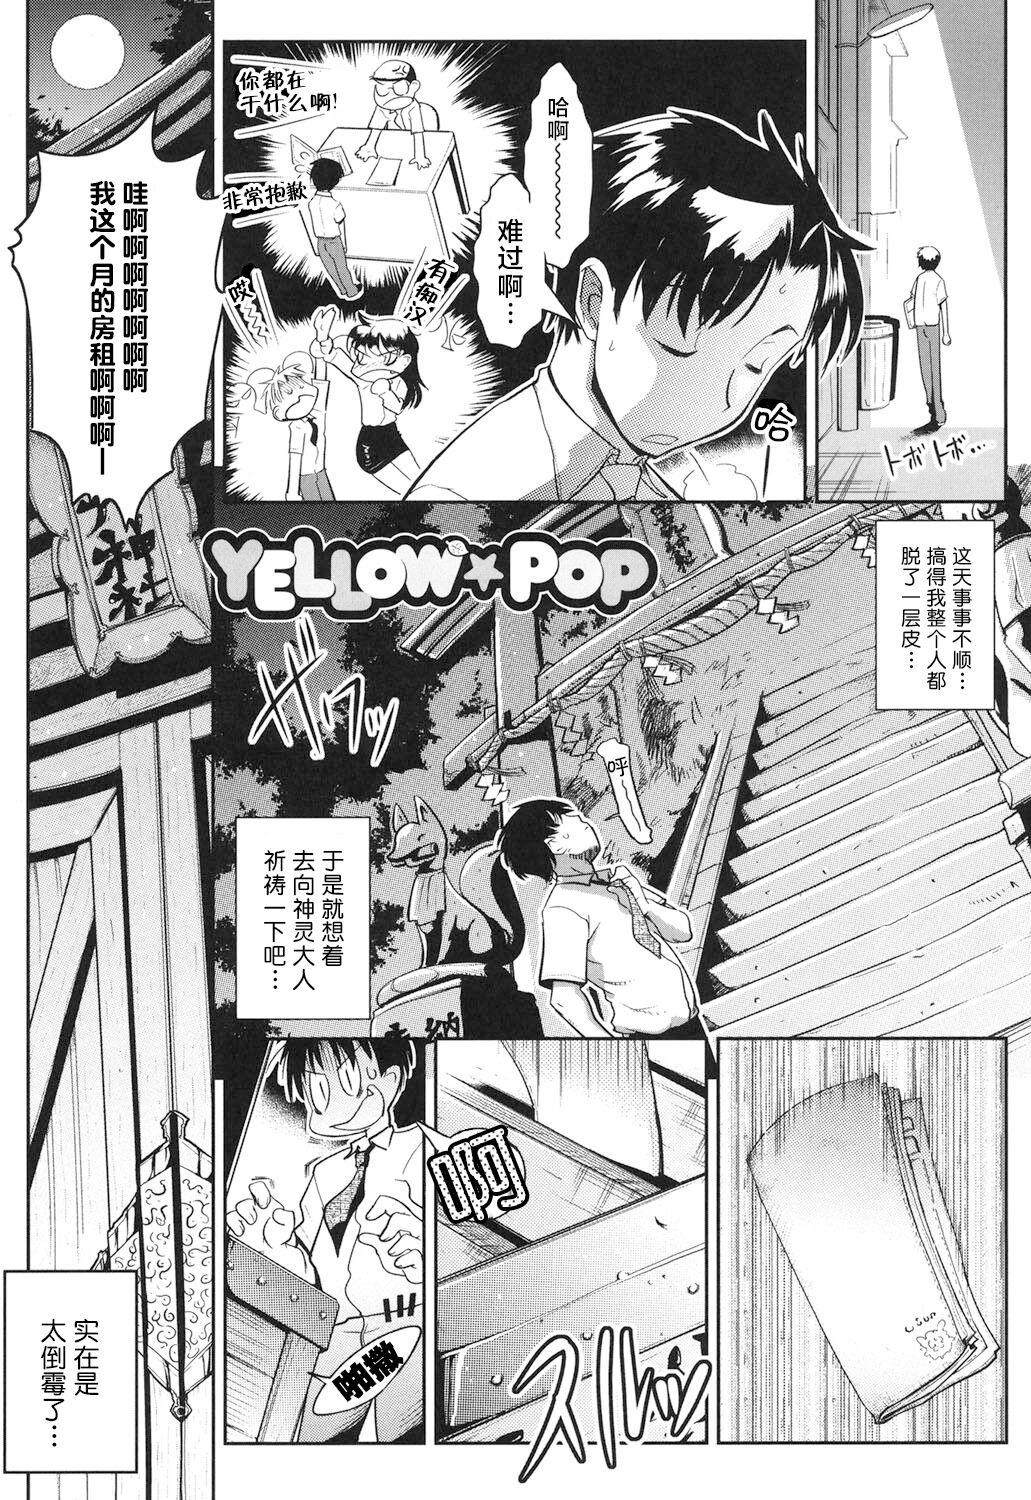 Blows YELLOW★POP Ch. 1 Pee - Page 2